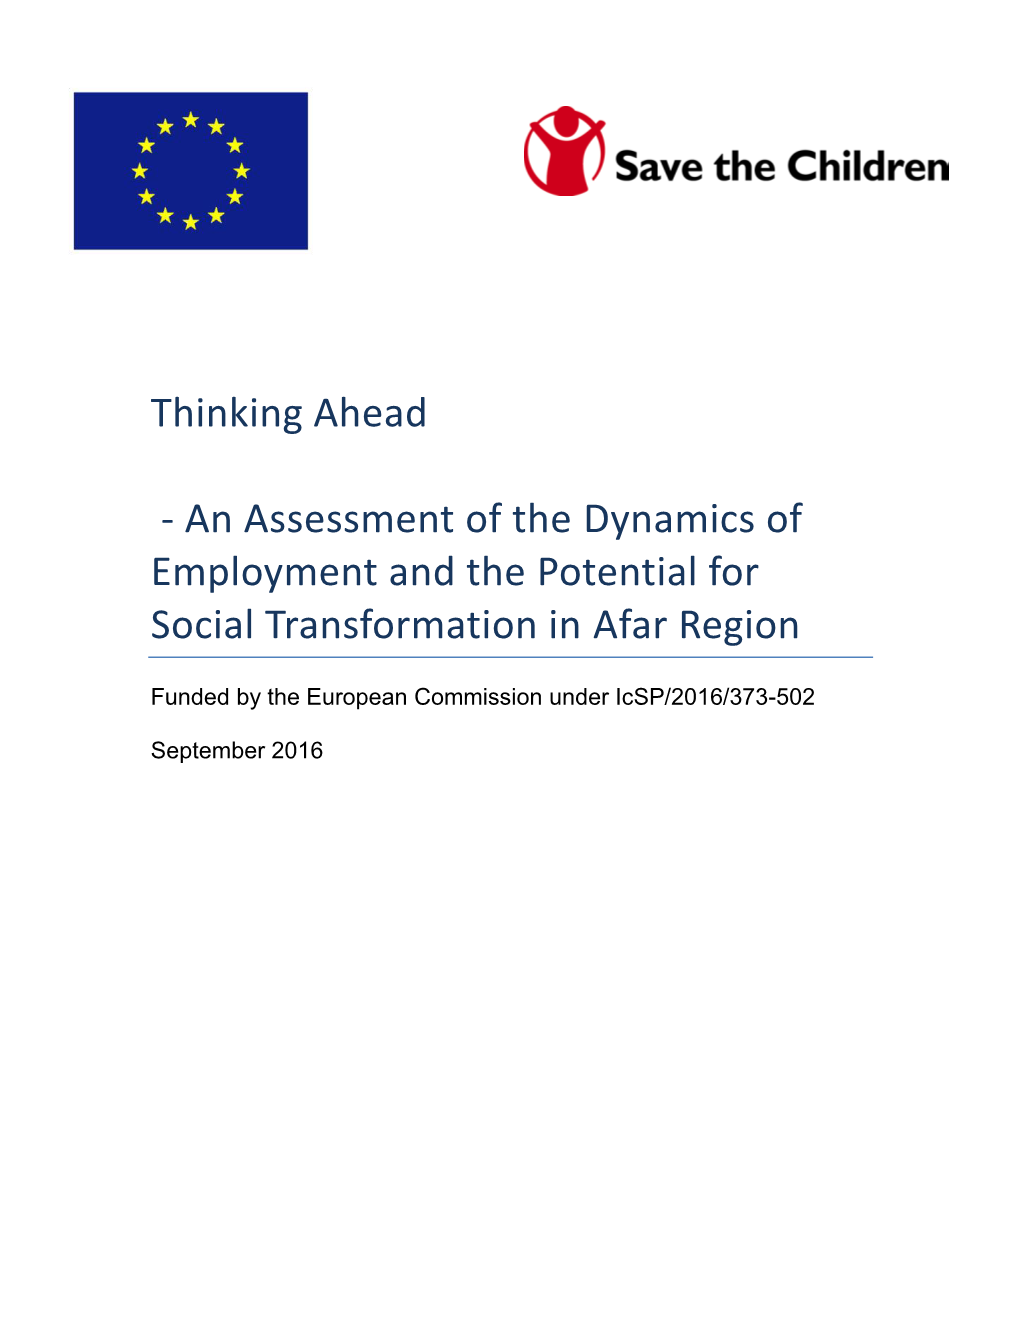 An Assessment of the Dynamics of Employment and the Potential for Social Transformation in Afar Region